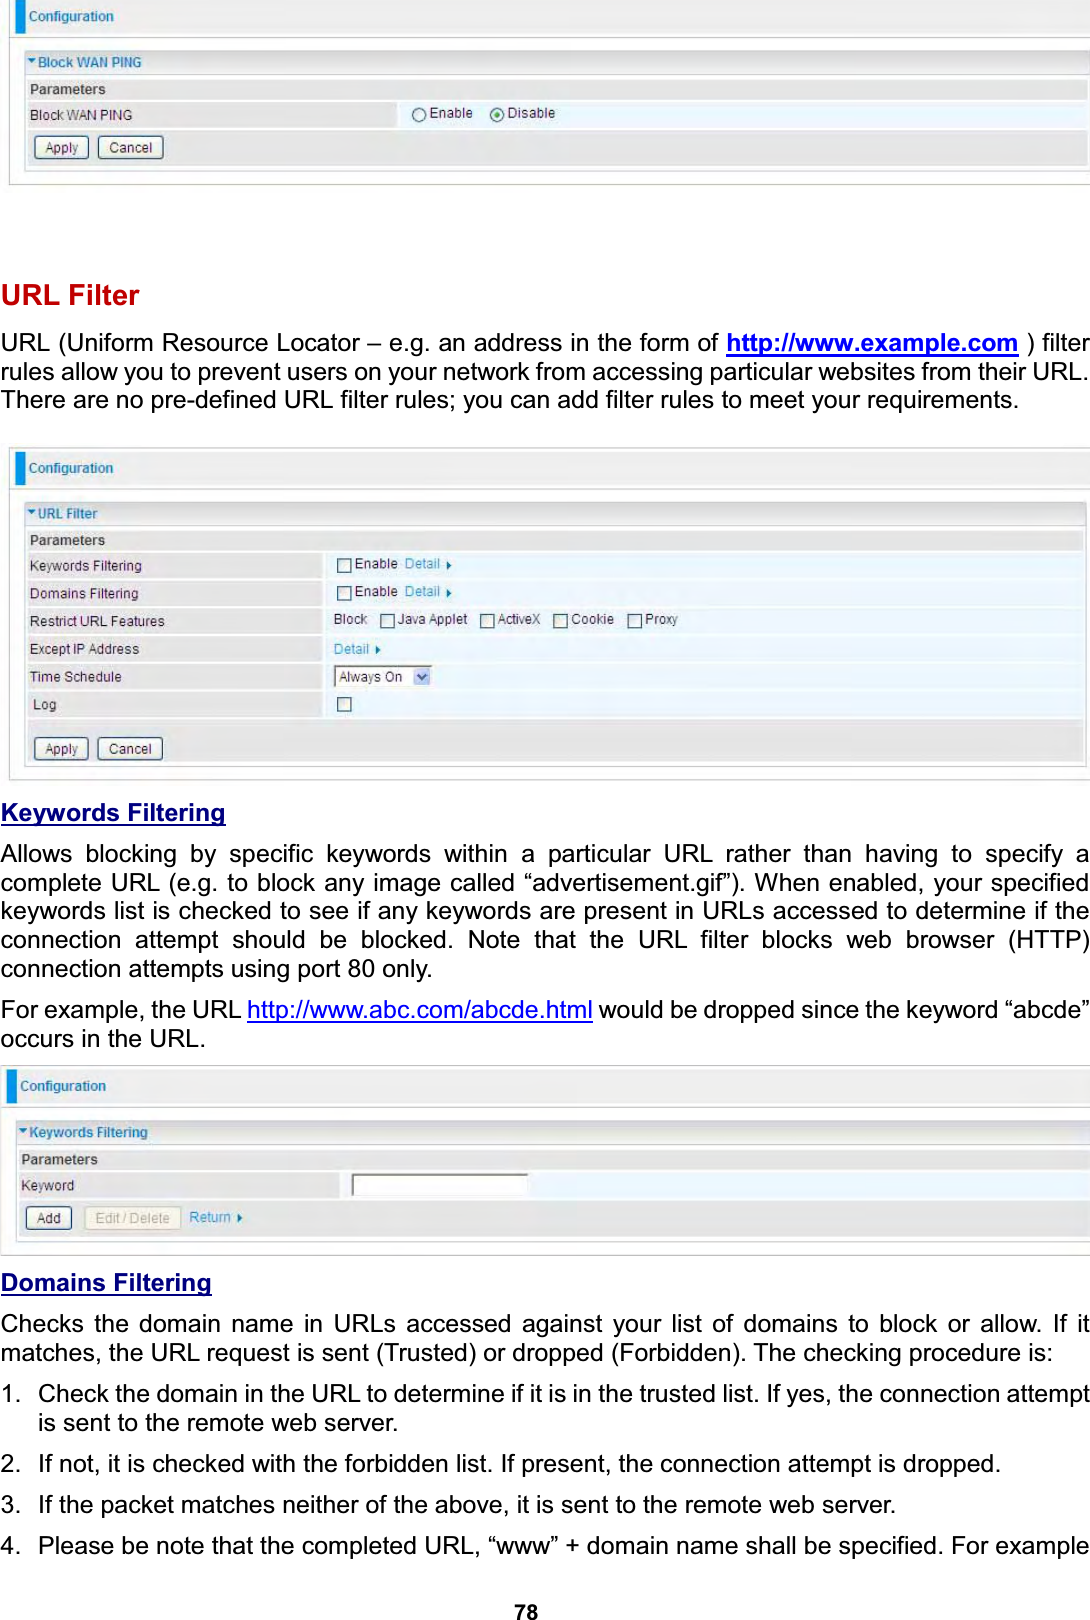  78    URL Filter URL (Uniform Resource Locator – e.g. an address in the form of http://www.example.com ) filter rules allow you to prevent users on your network from accessing particular websites from their URL. There are no pre-defined URL filter rules; you can add filter rules to meet your requirements.   Keywords Filtering  Allows blocking by specific keywords within a particular URL rather than having to specify a complete URL (e.g. to block any image called “advertisement.gif”). When enabled, your specified keywords list is checked to see if any keywords are present in URLs accessed to determine if the connection attempt should be blocked. Note that the URL filter blocks web browser (HTTP) connection attempts using port 80 only. For example, the URL http://www.abc.com/abcde.html would be dropped since the keyword “abcde” occurs in the URL.   Domains Filtering Checks the domain name in URLs accessed against your list of domains to block or allow. If it matches, the URL request is sent (Trusted) or dropped (Forbidden). The checking procedure is: 1.  Check the domain in the URL to determine if it is in the trusted list. If yes, the connection attempt is sent to the remote web server. 2.  If not, it is checked with the forbidden list. If present, the connection attempt is dropped. 3.  If the packet matches neither of the above, it is sent to the remote web server. 4.  Please be note that the completed URL, “www” + domain name shall be specified. For example 